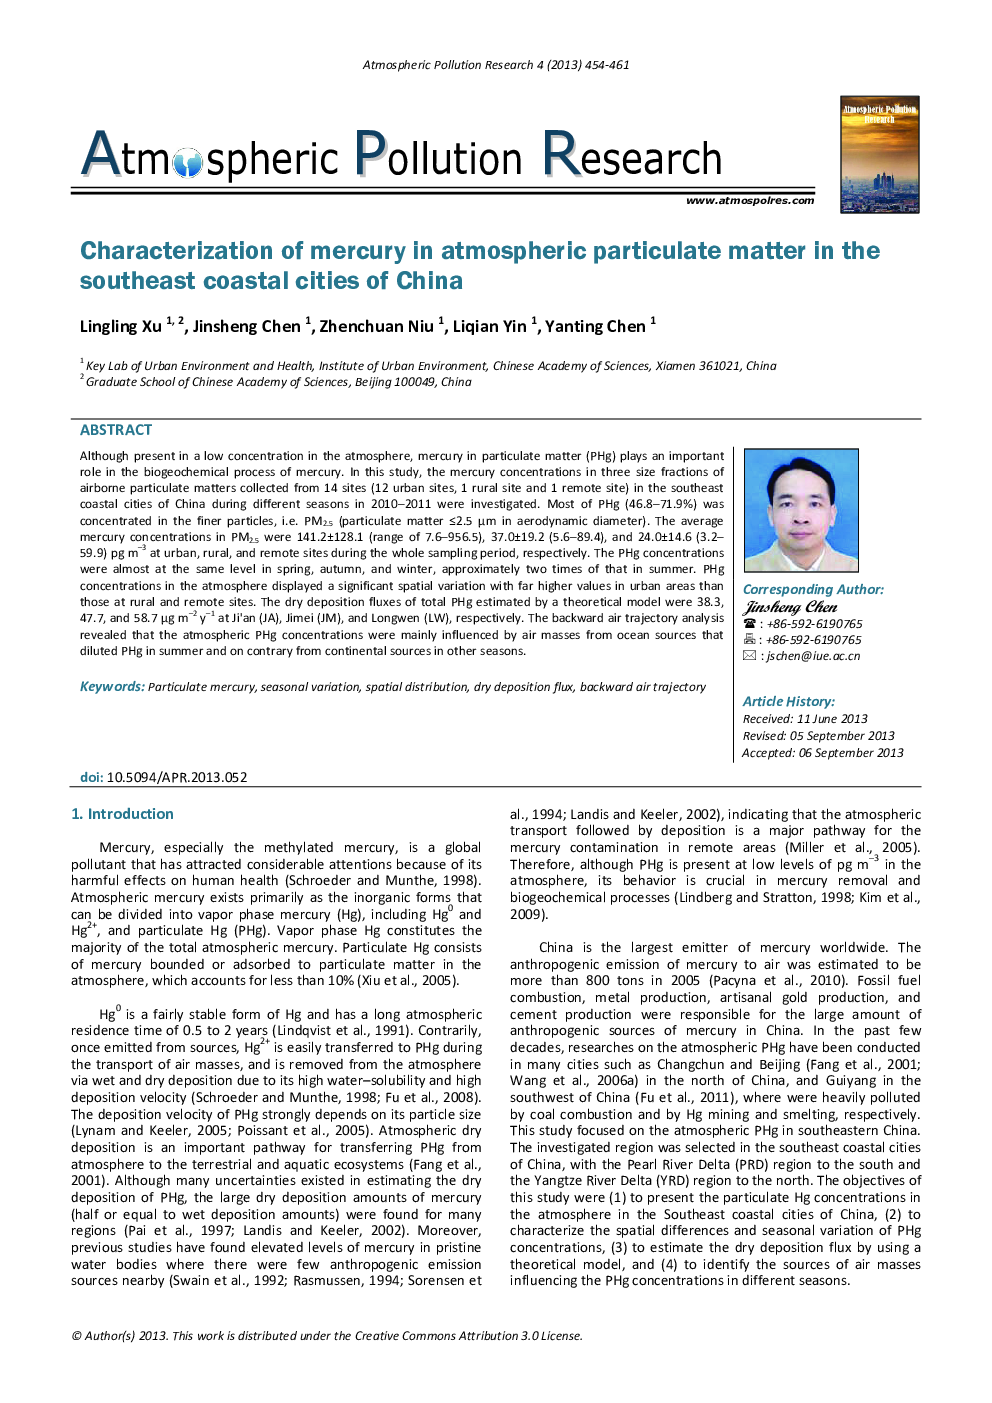 Characterization of mercury in atmospheric particulate matter in the southeast coastal cities of China